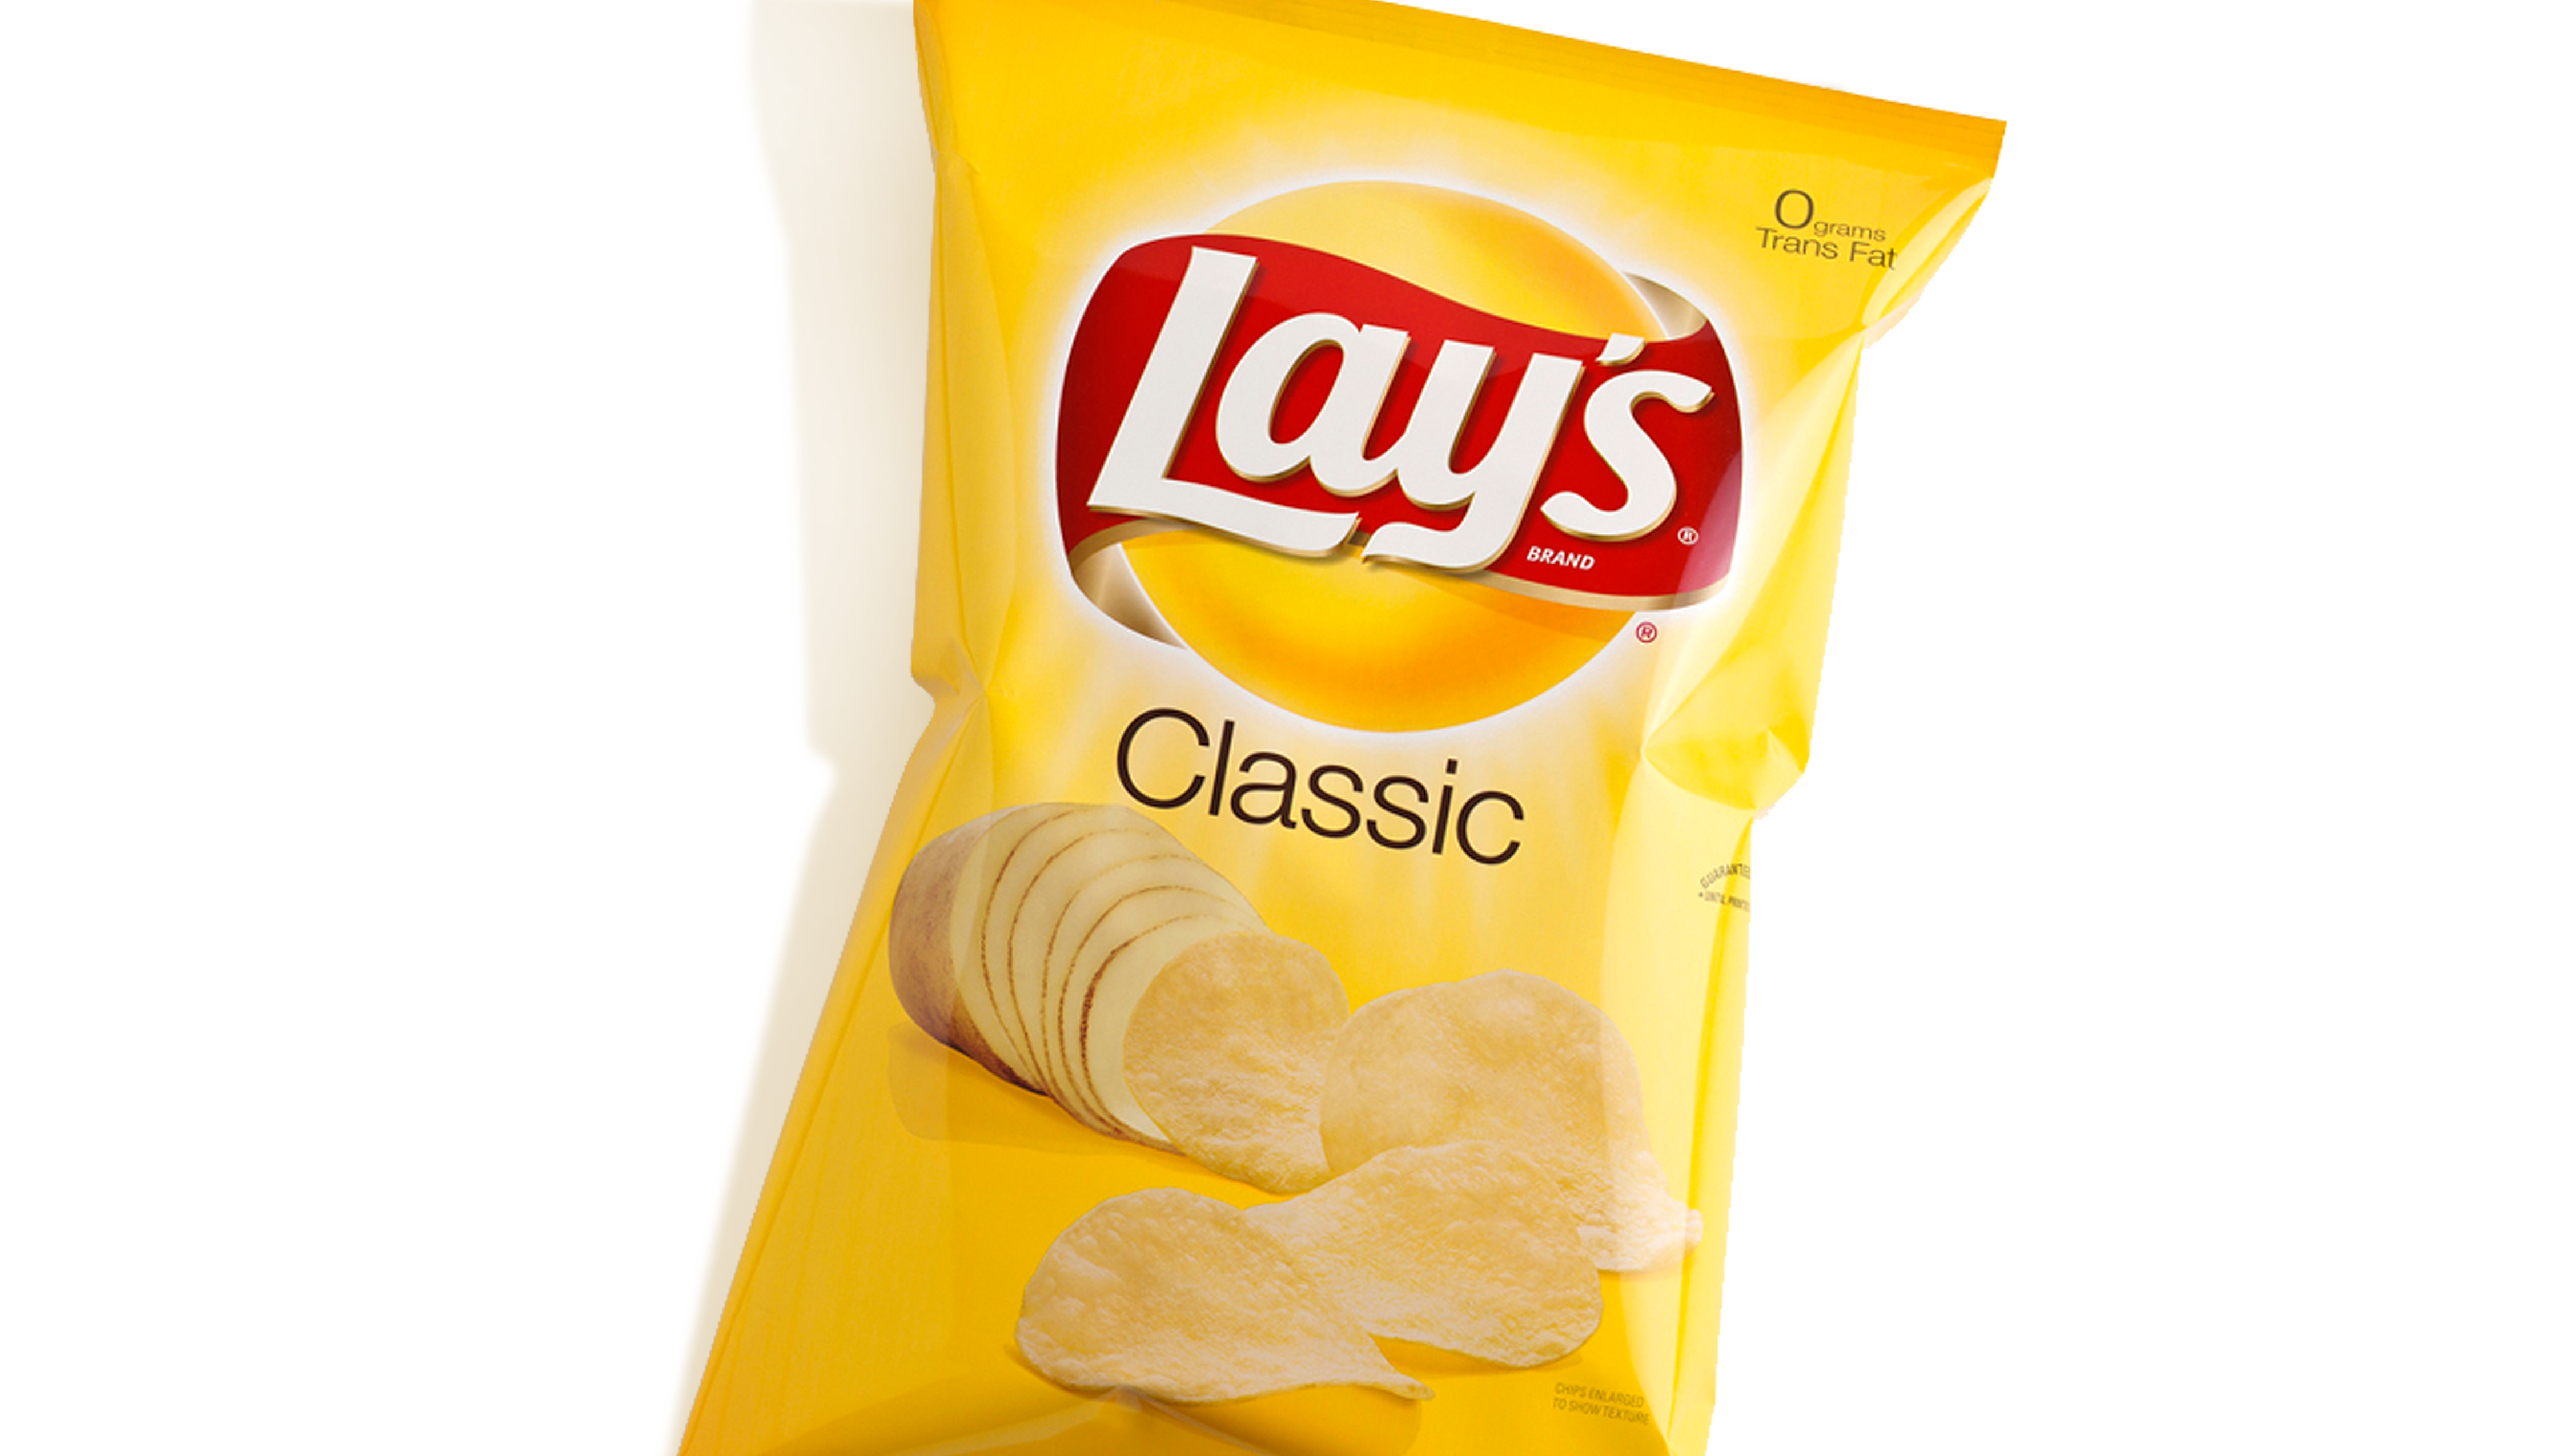 Lays Chips Logo